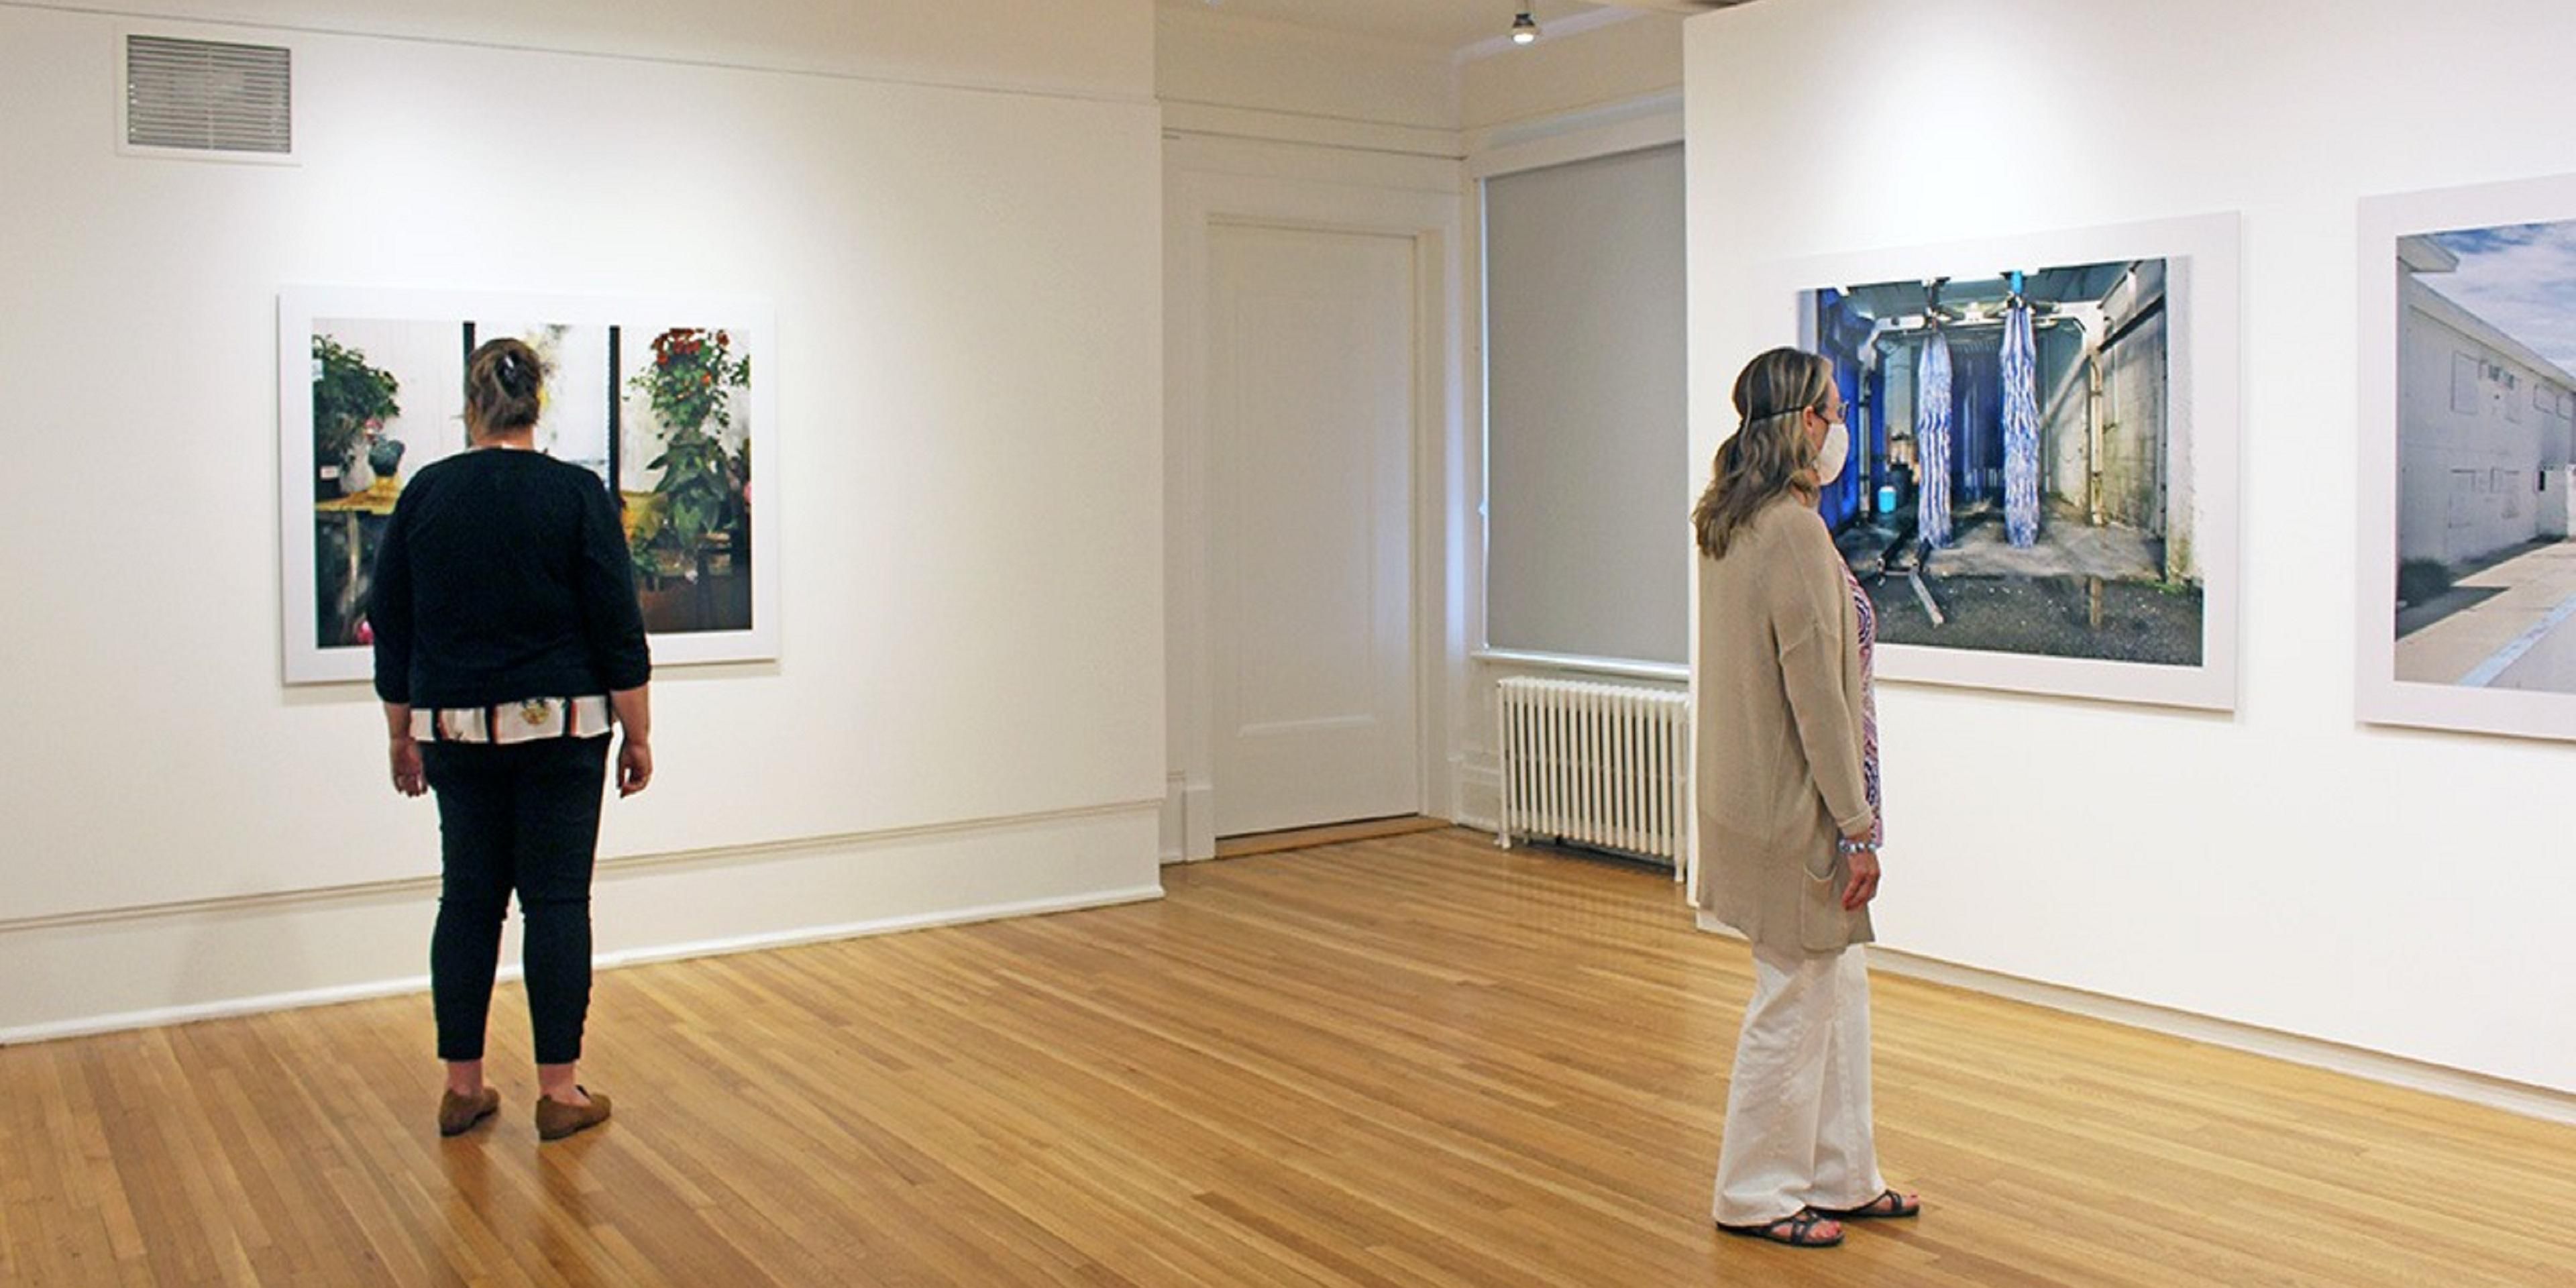 Burnaby Art Gallery features a curation of art pieces, exhibiting local, regional, national and international artists throughout its galleries